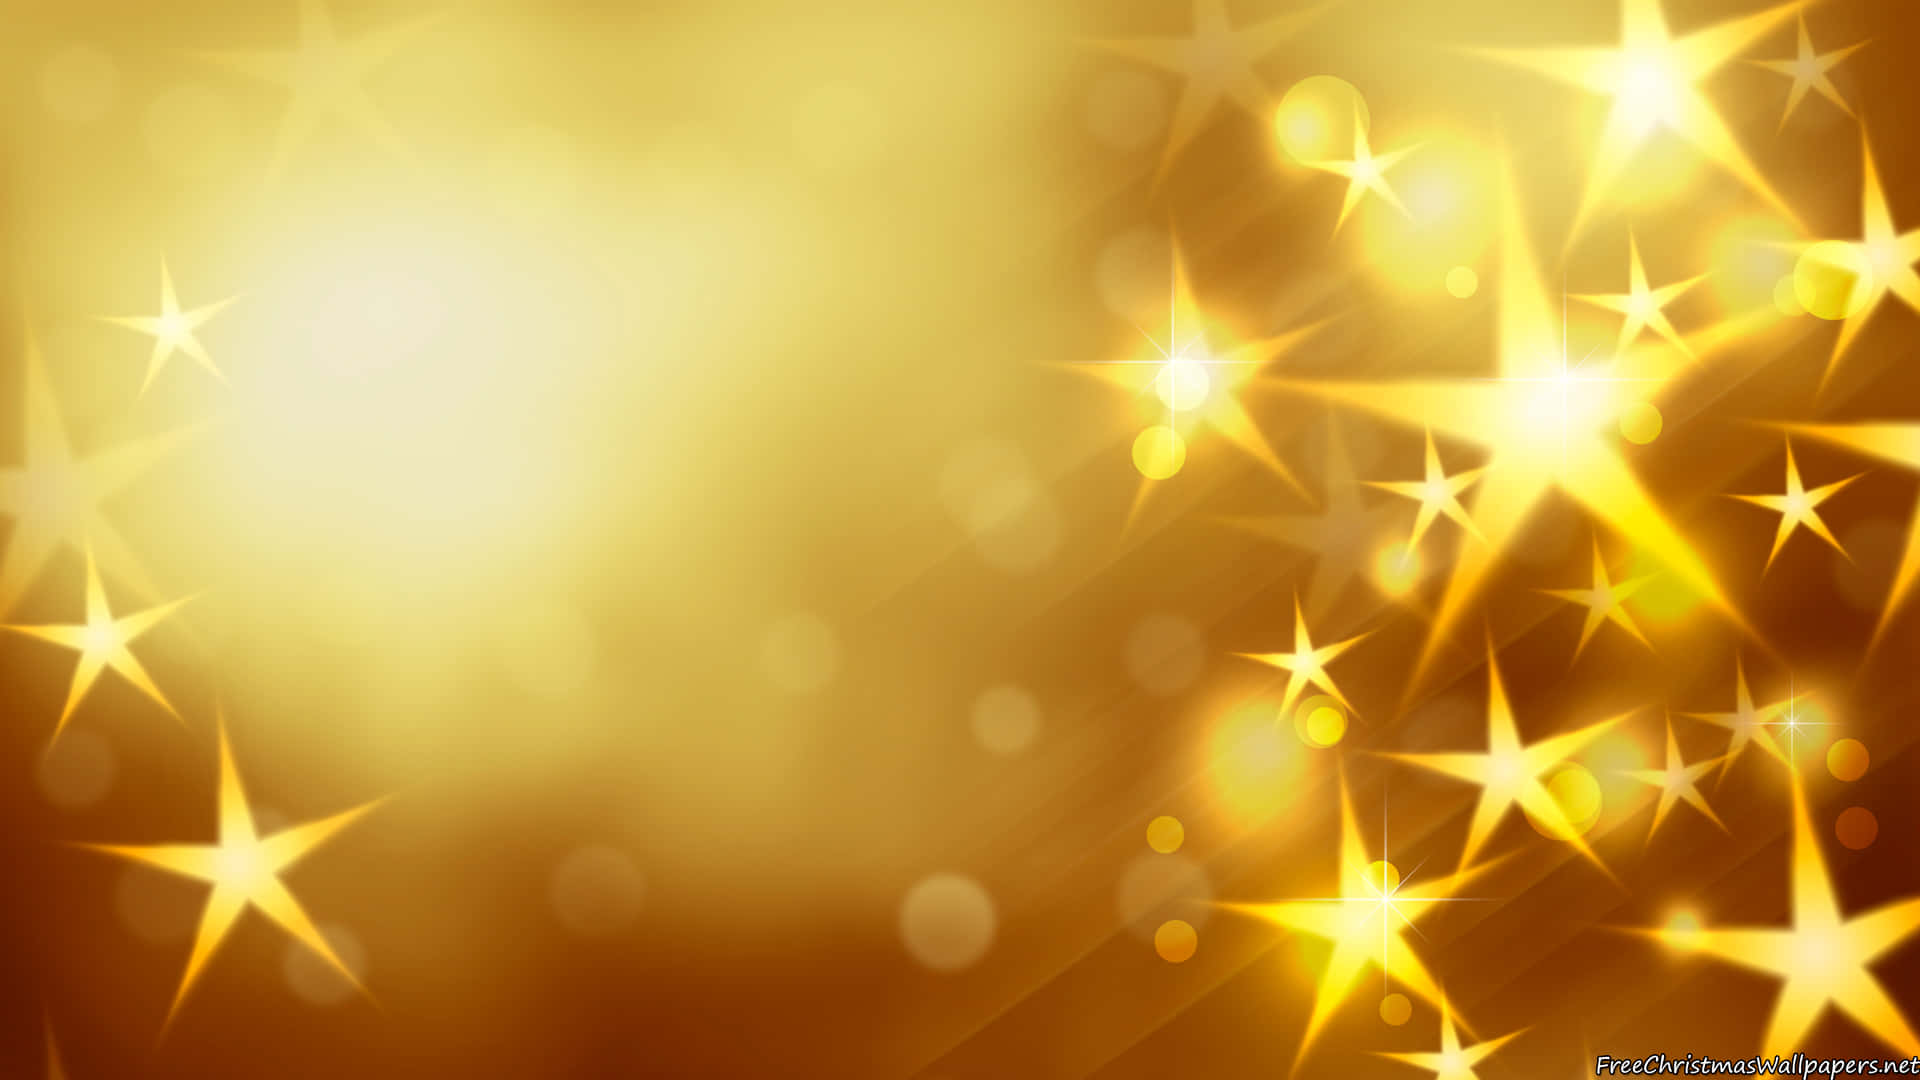 Show your achievements with some golden stars Wallpaper